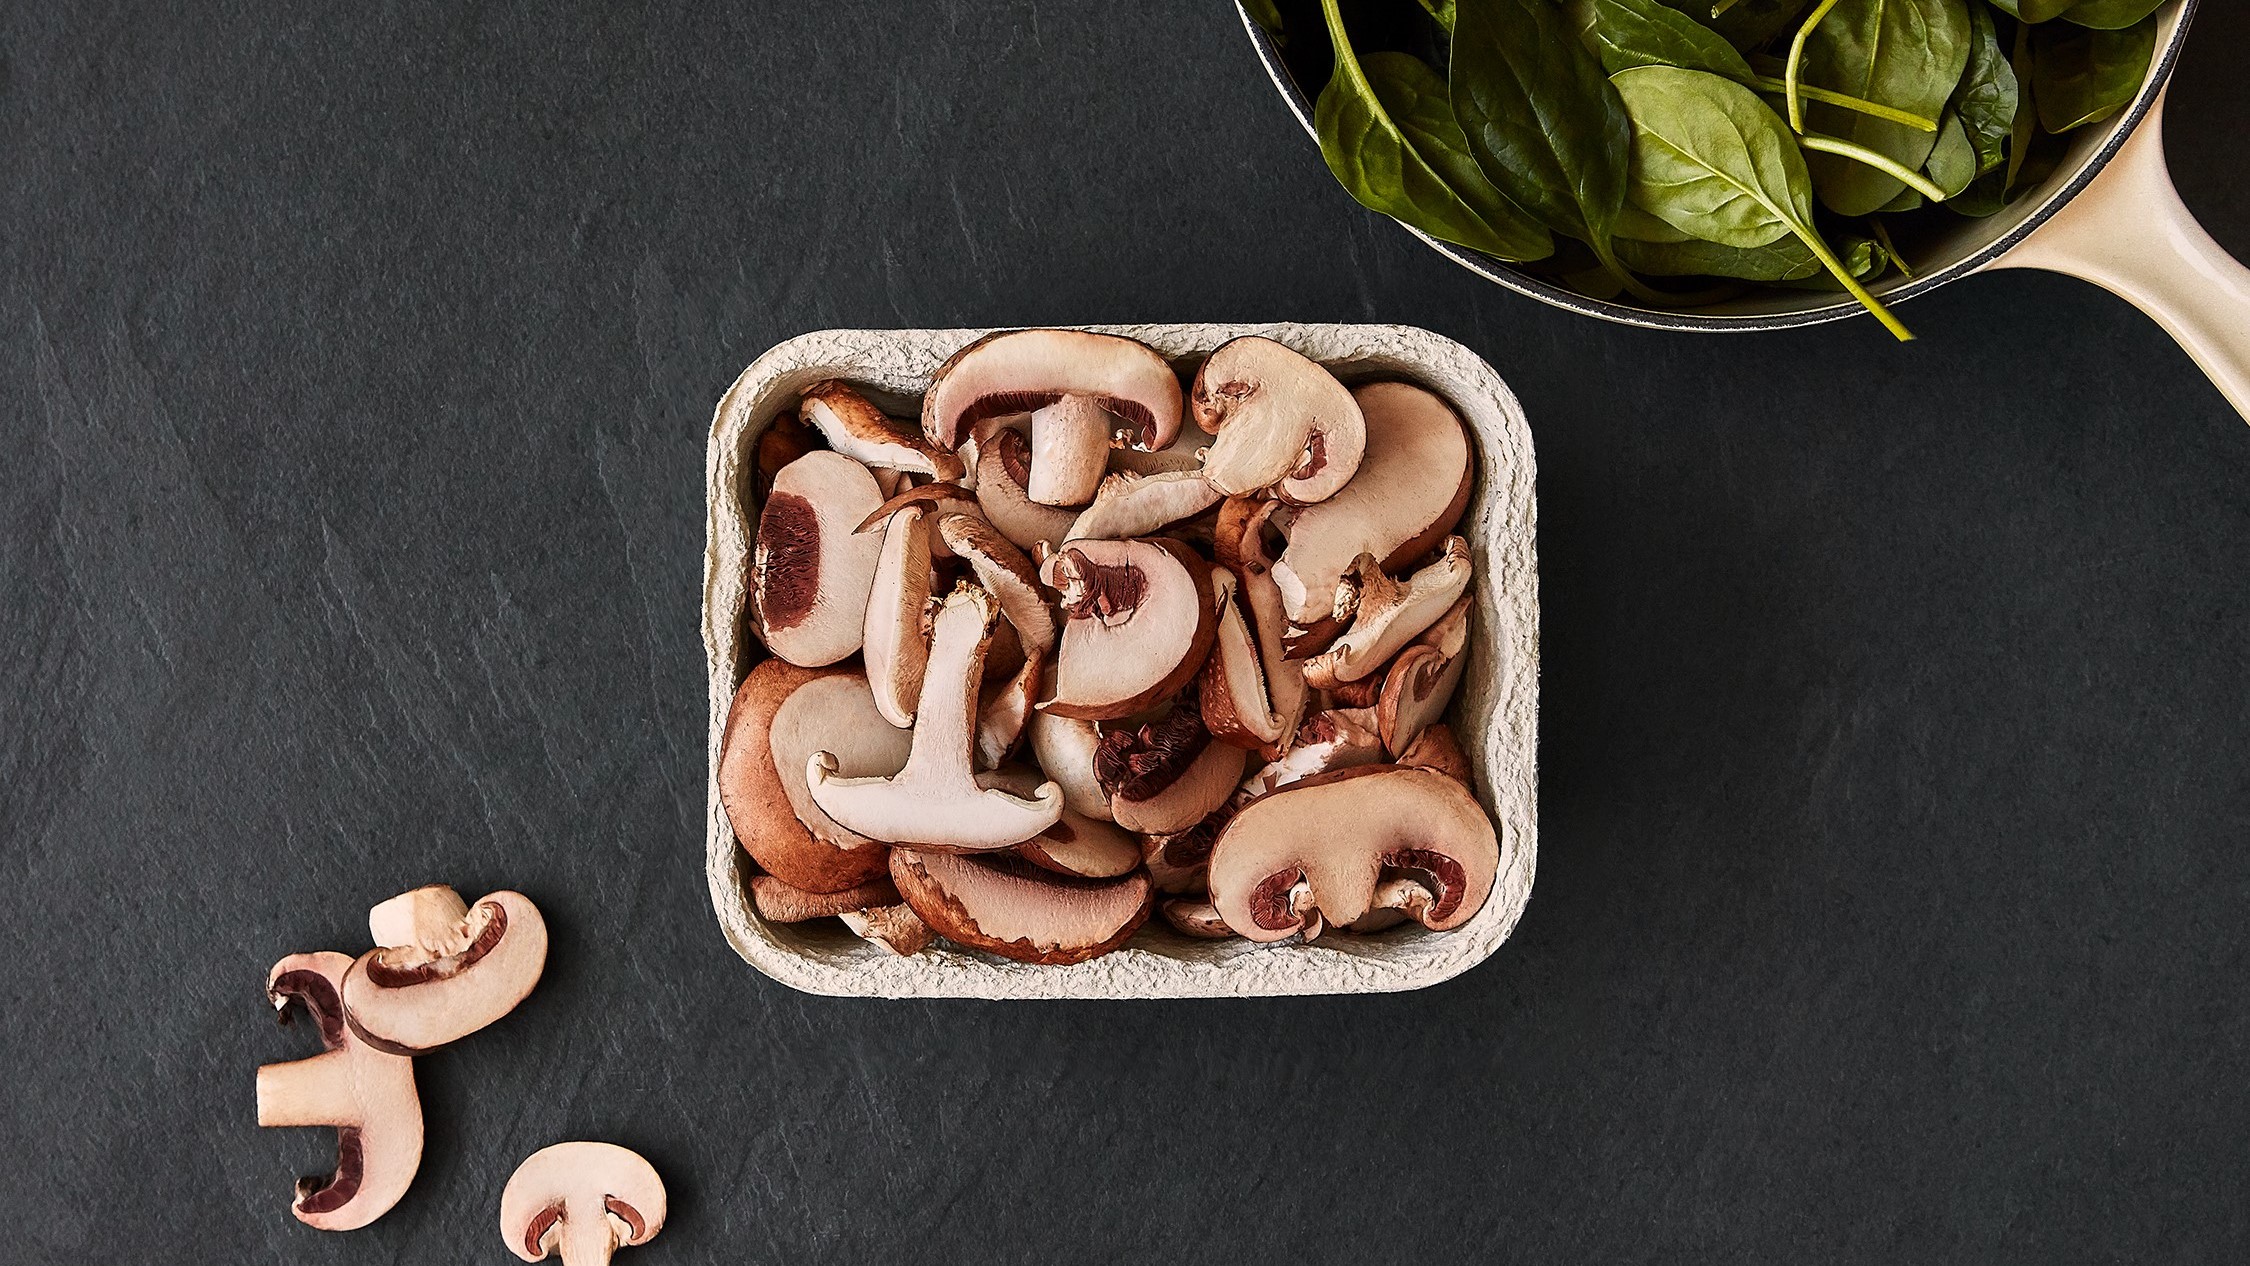 moulded-pulp-tray-recycled-recyclable-compostable-mushrooms